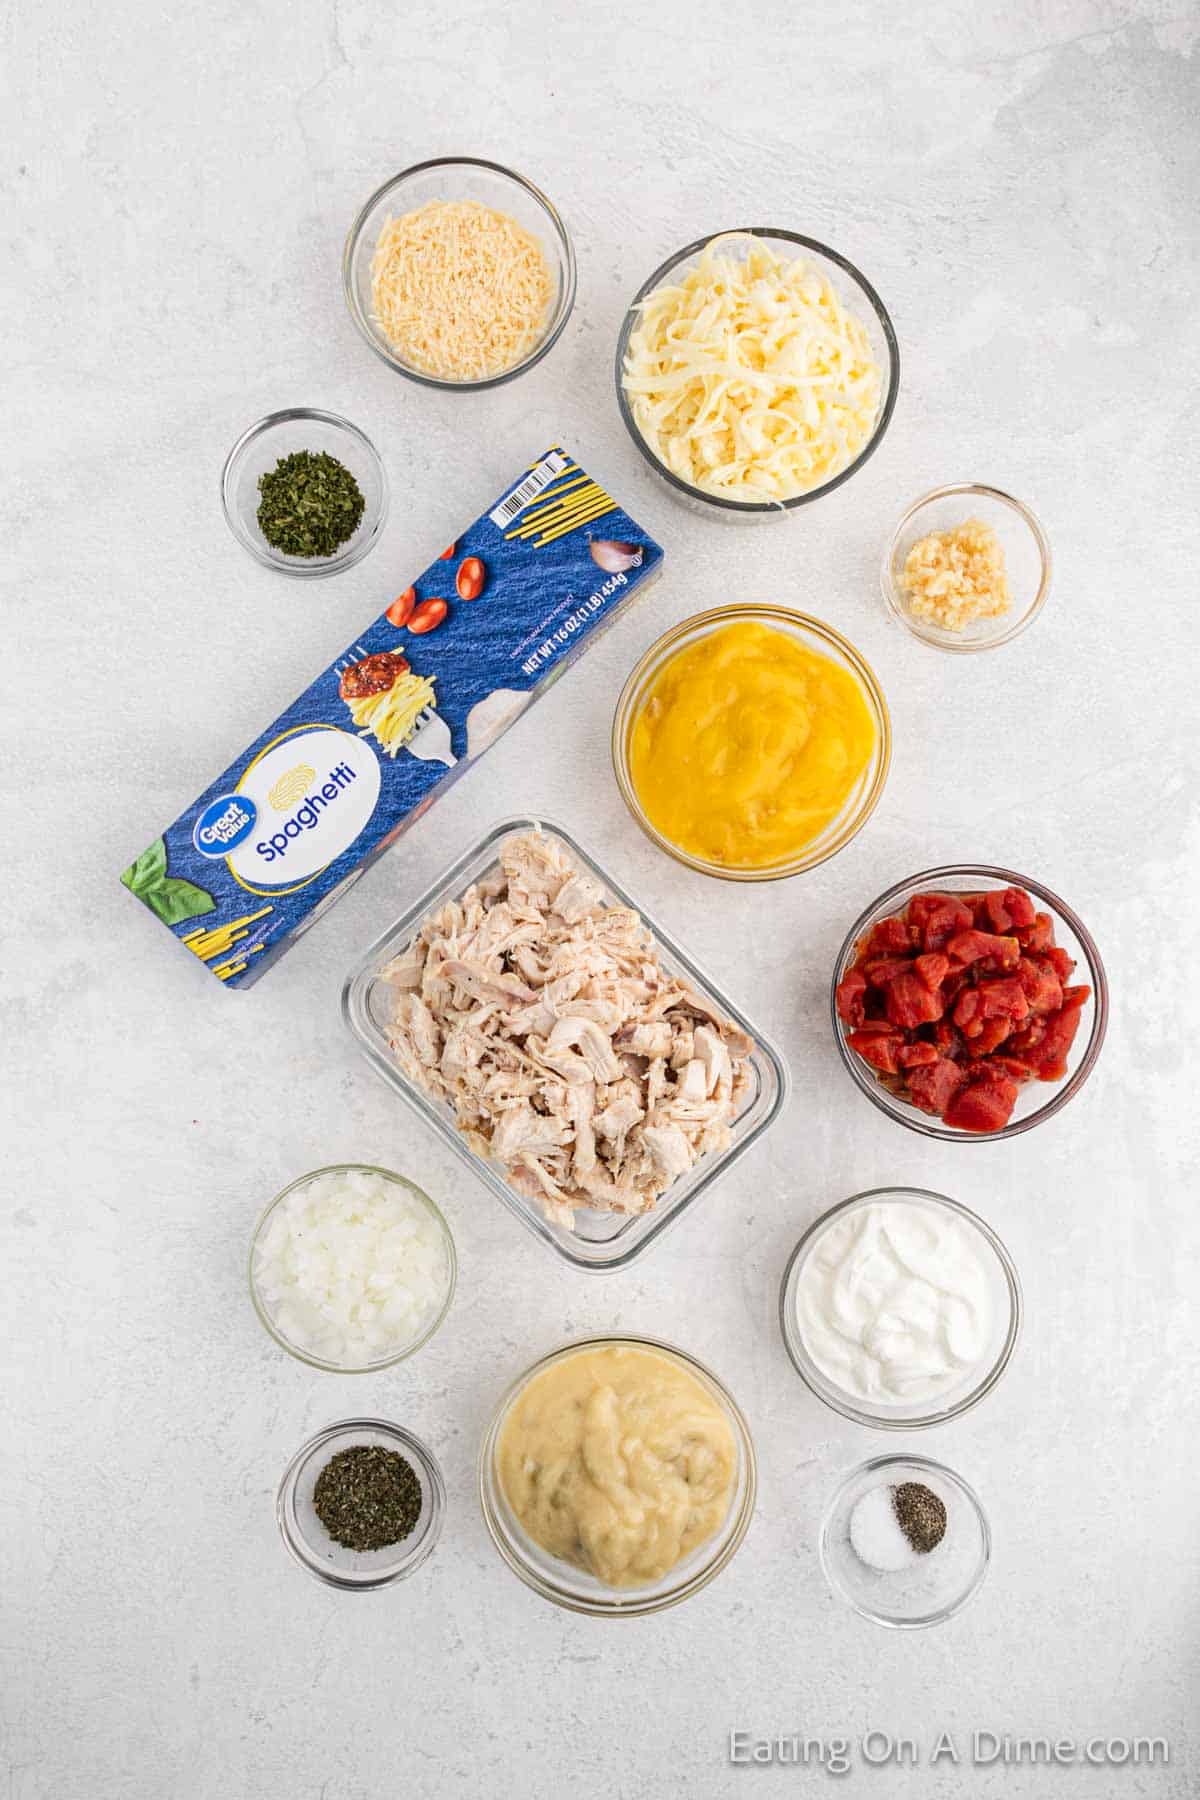 Ingredients - chicken, diced tomatoes, celery soup, chicken soup, onion, garlic, dried parsley, basil, sour cream, monterey jack cheese, spaghetti, salt, pepper, parmesan cheese